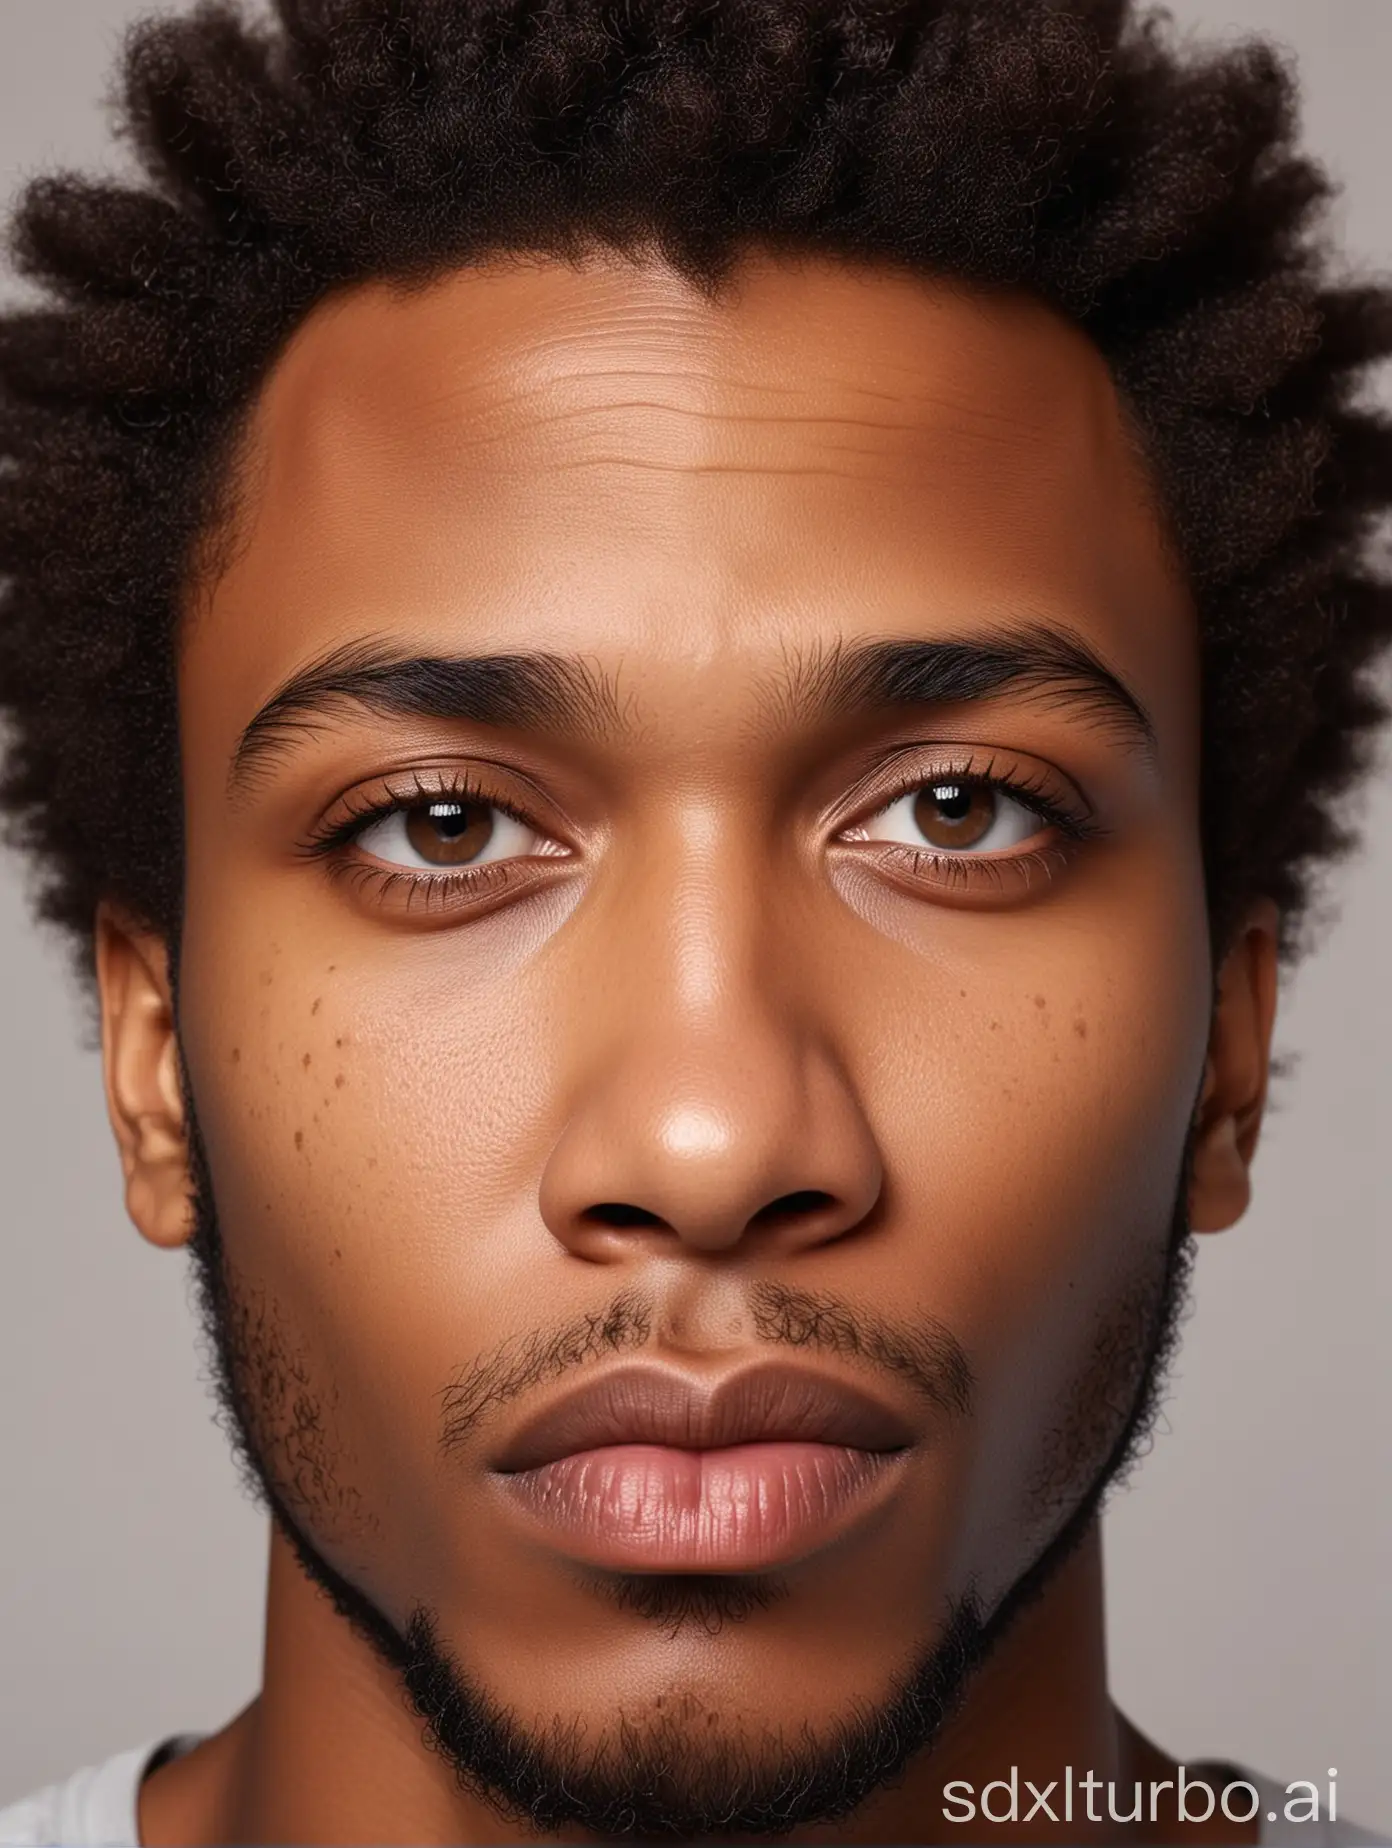 Intimate-Portrait-of-Handsome-Afro-Male-Model-with-Engaging-Expression-and-Light-Brown-Eyes